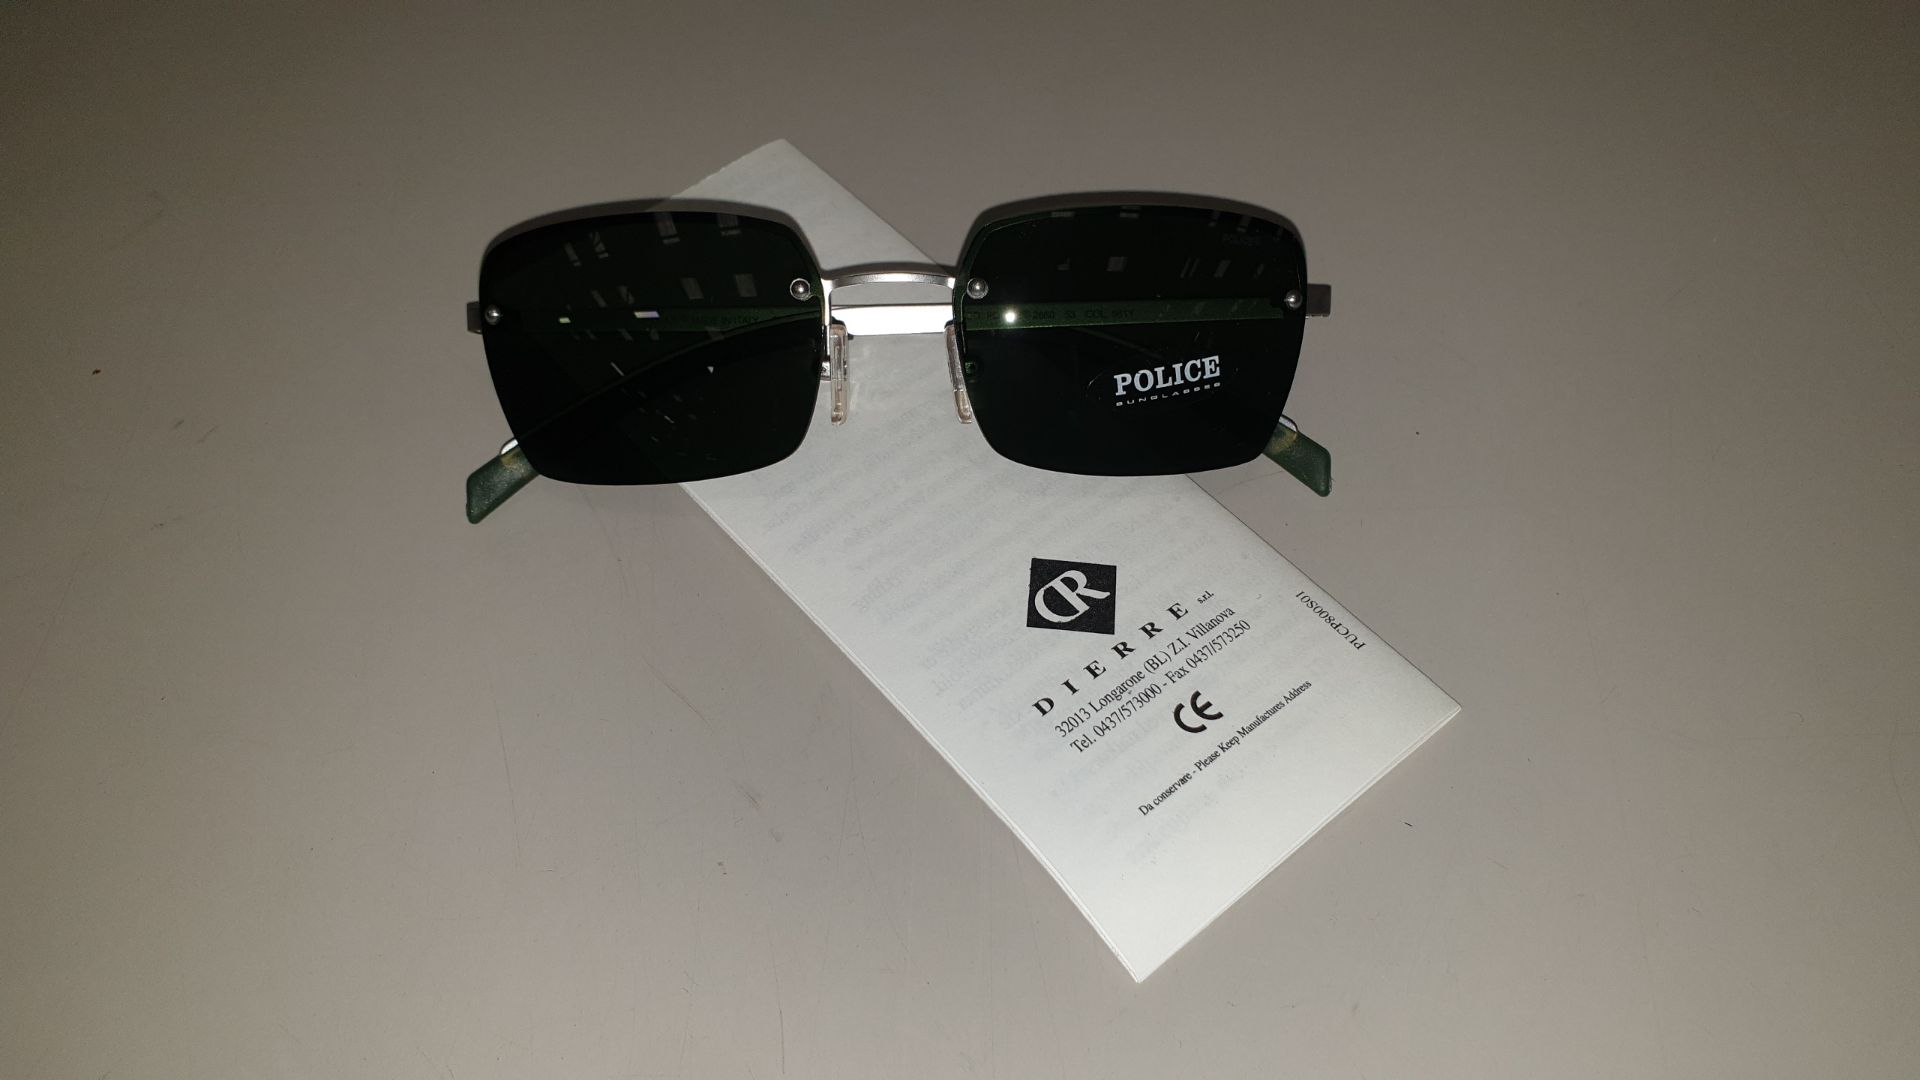 15 X PAIRS OF BRAND NEW GENUINE POLICE SUNGLASSES IN 1 BOX - S2680-581Y